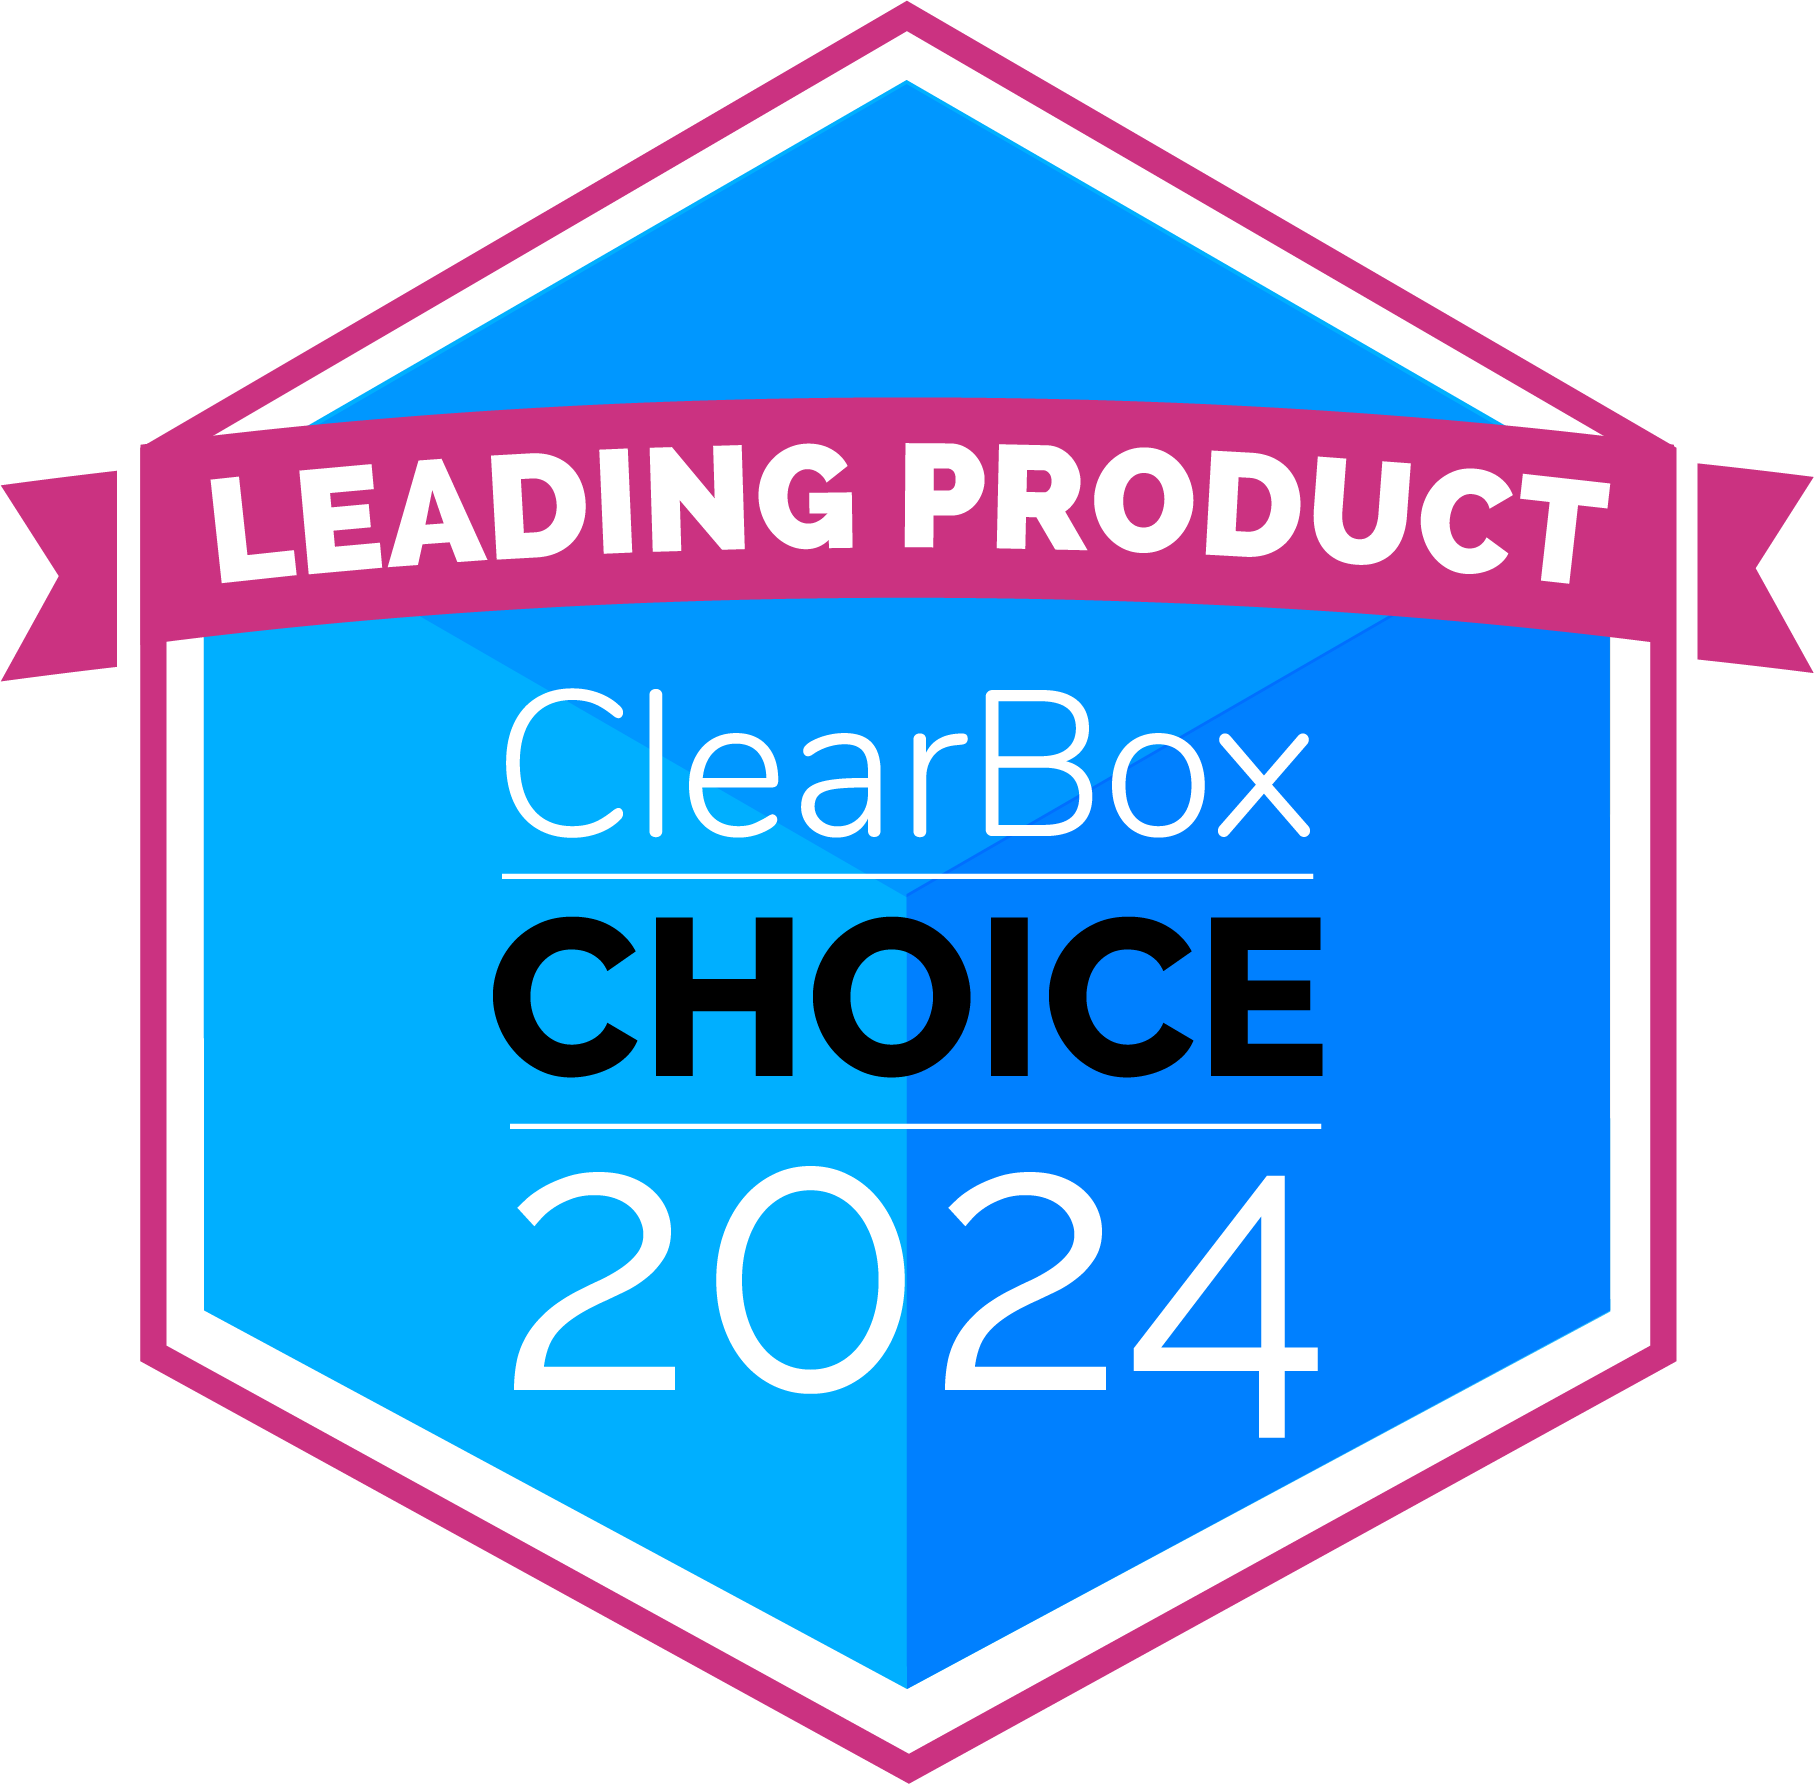 ClearBox award image.